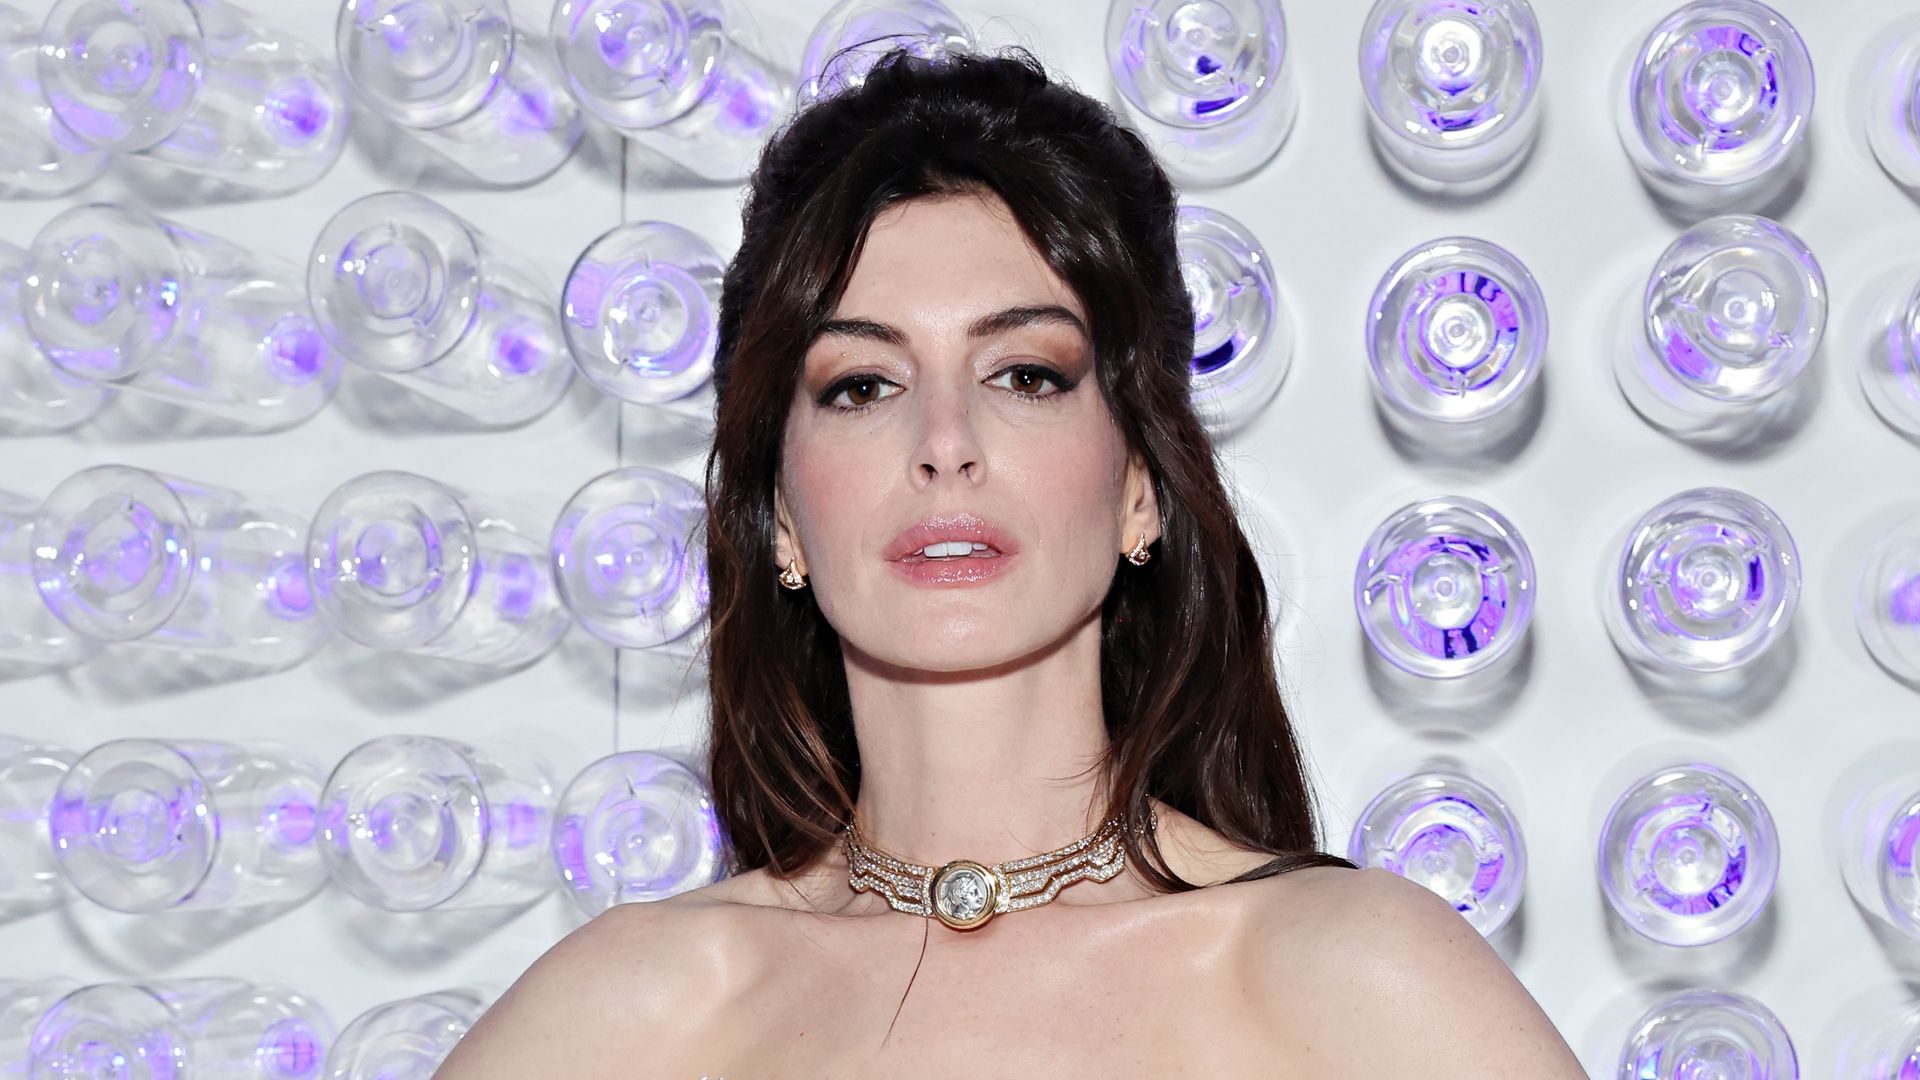 NEW YORK, NEW YORK - MAY 01: Anne Hathaway attends The 2023 Met Gala Celebrating "Karl Lagerfeld: A Line Of Beauty" at The Metropolitan Museum of Art on May 01, 2023 in New York City. (Photo by Cindy Ord/MG23/Getty Images for The Met Museum/Vogue)